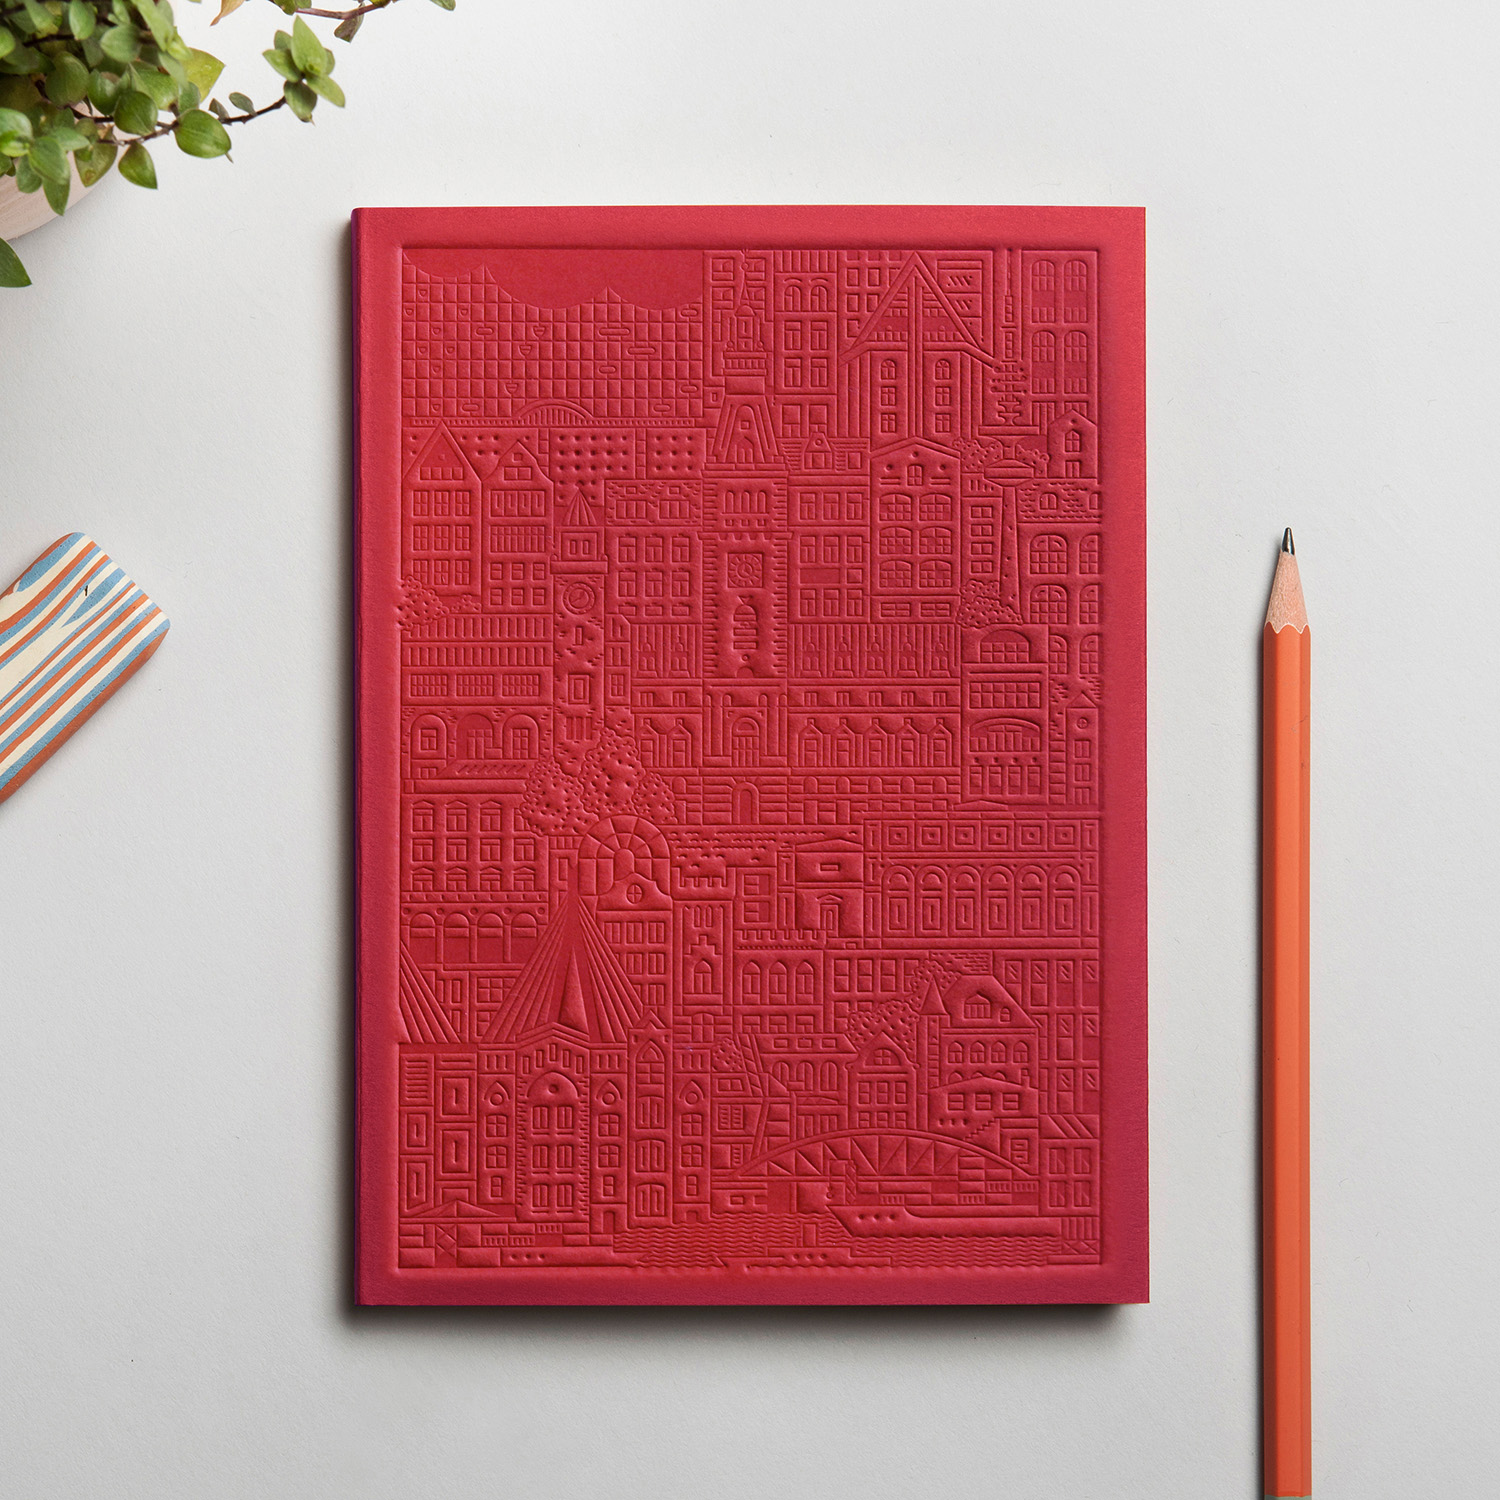 Hamburg Notebook by The City Works